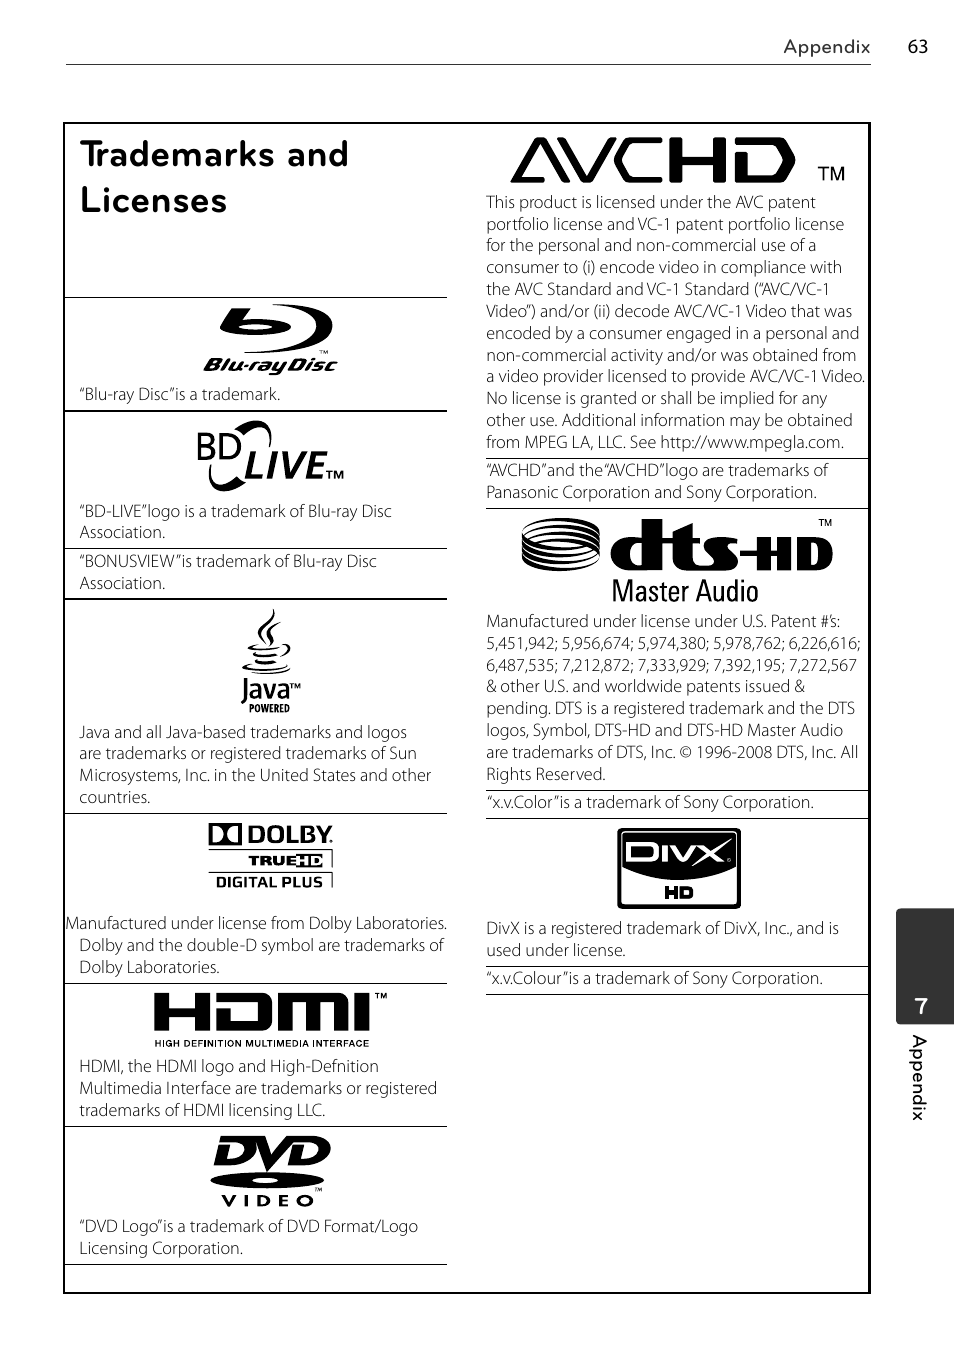 Trademarks and licenses | LG BD678N User Manual | Page 63 / 72